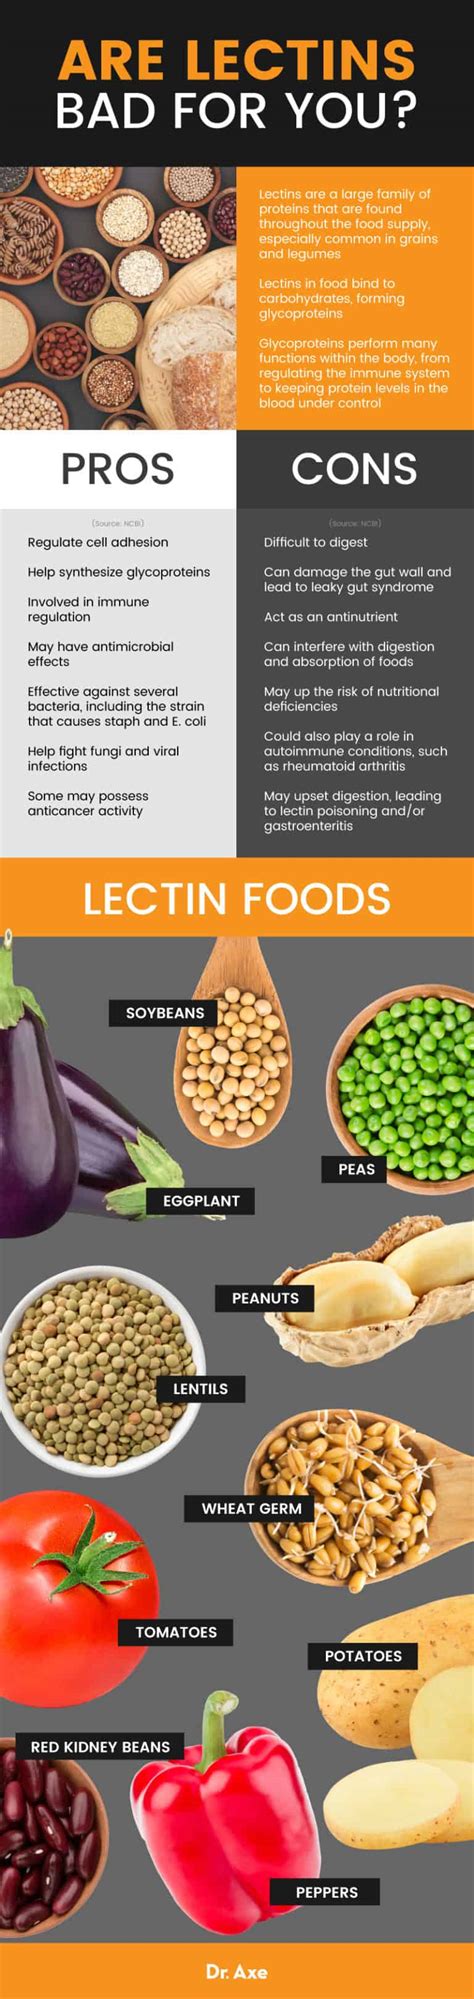 lectins bad   pros  cons  lectin foods dr axe